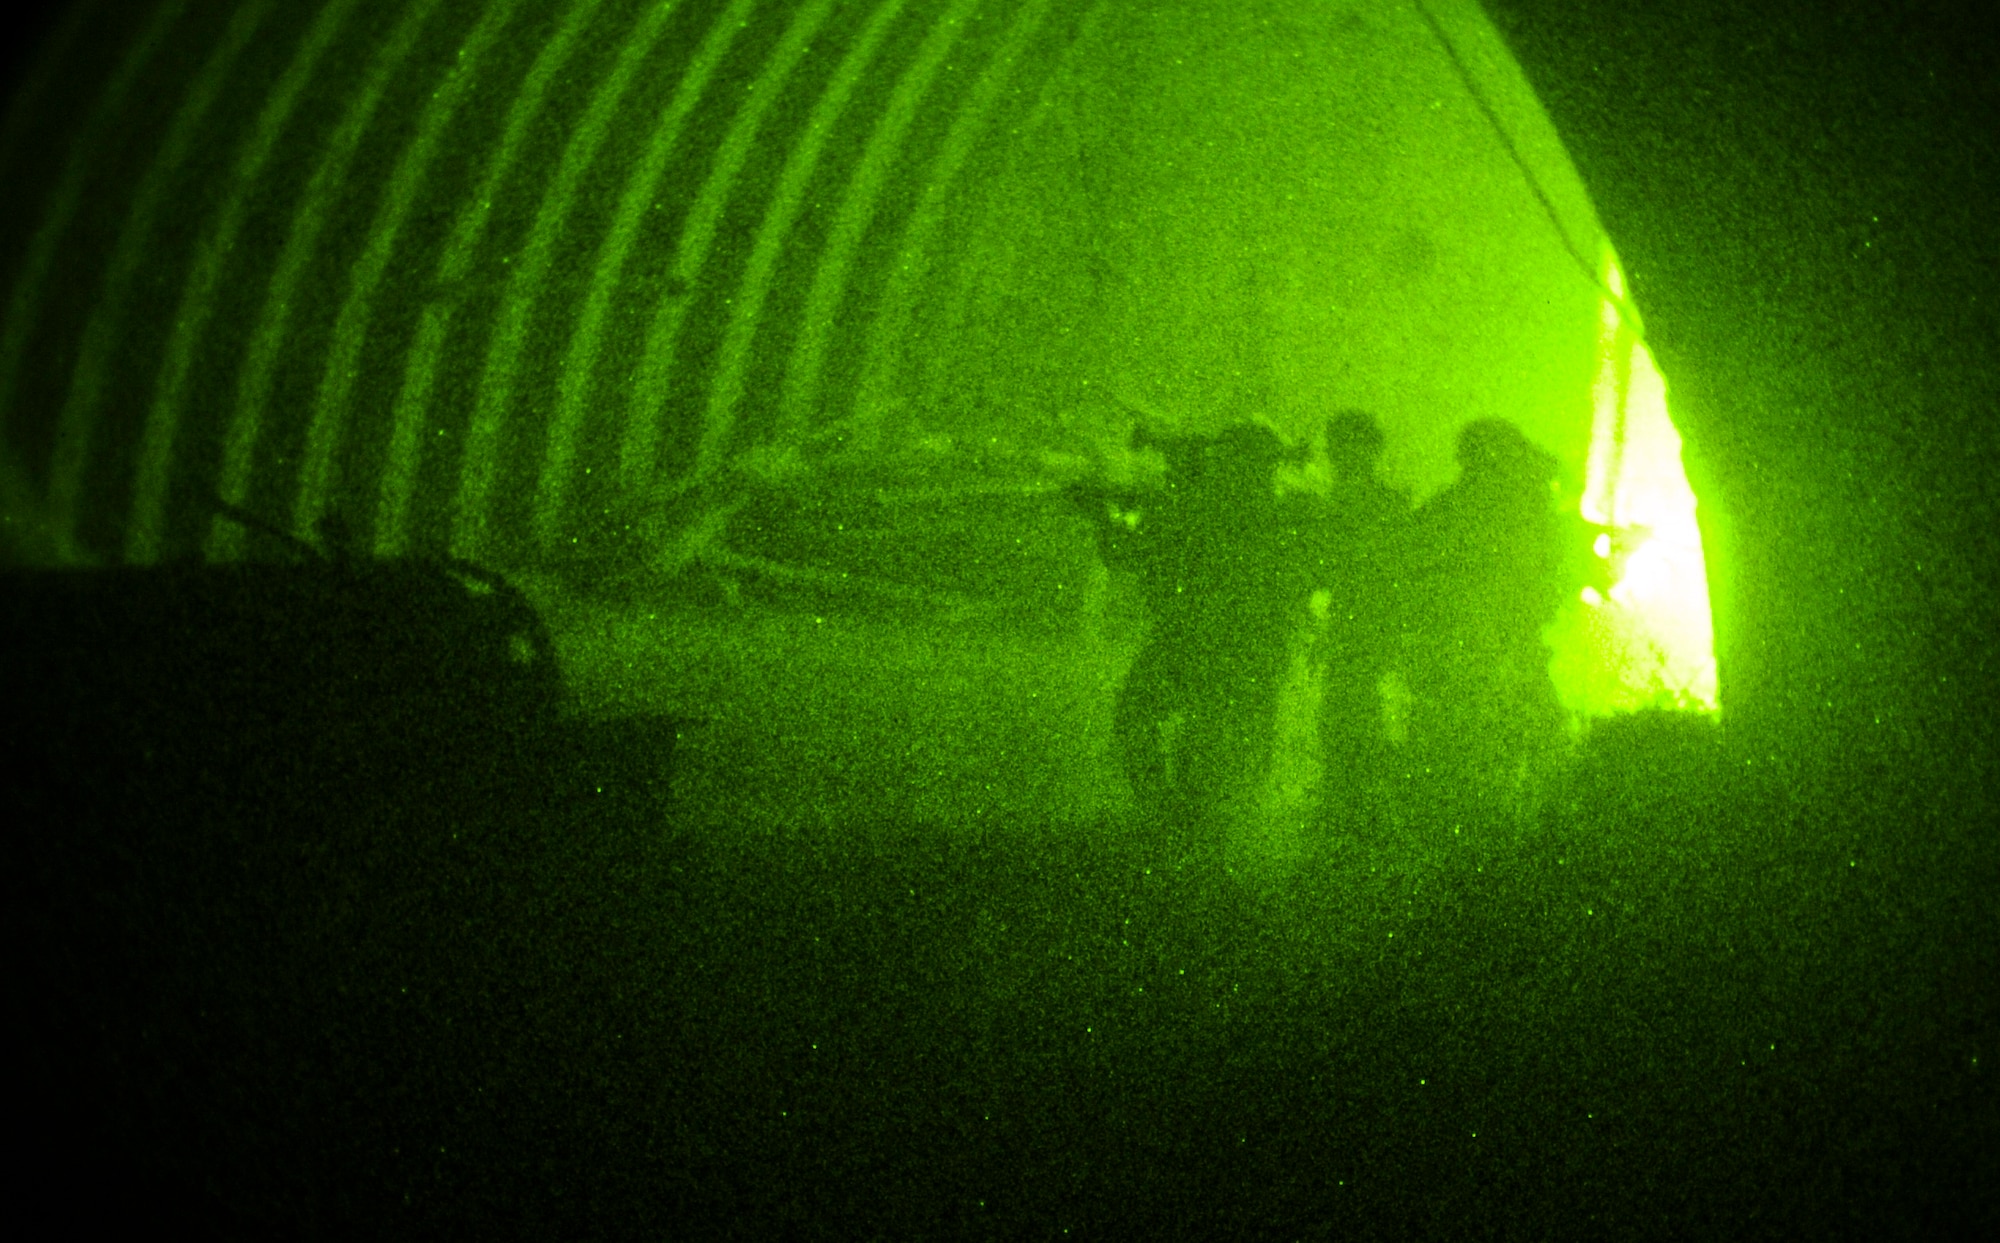 Soldiers of the 7th Special Forces Group clear a hardened aircraft shelter during a night exercise on Eglin Range, Fla., Feb. 20, 2014. Simulated opposition forces created a perimeter around the facility, which the soldiers breached. (U.S. Air Force photo/Senior Airman Michelle Vickers) 